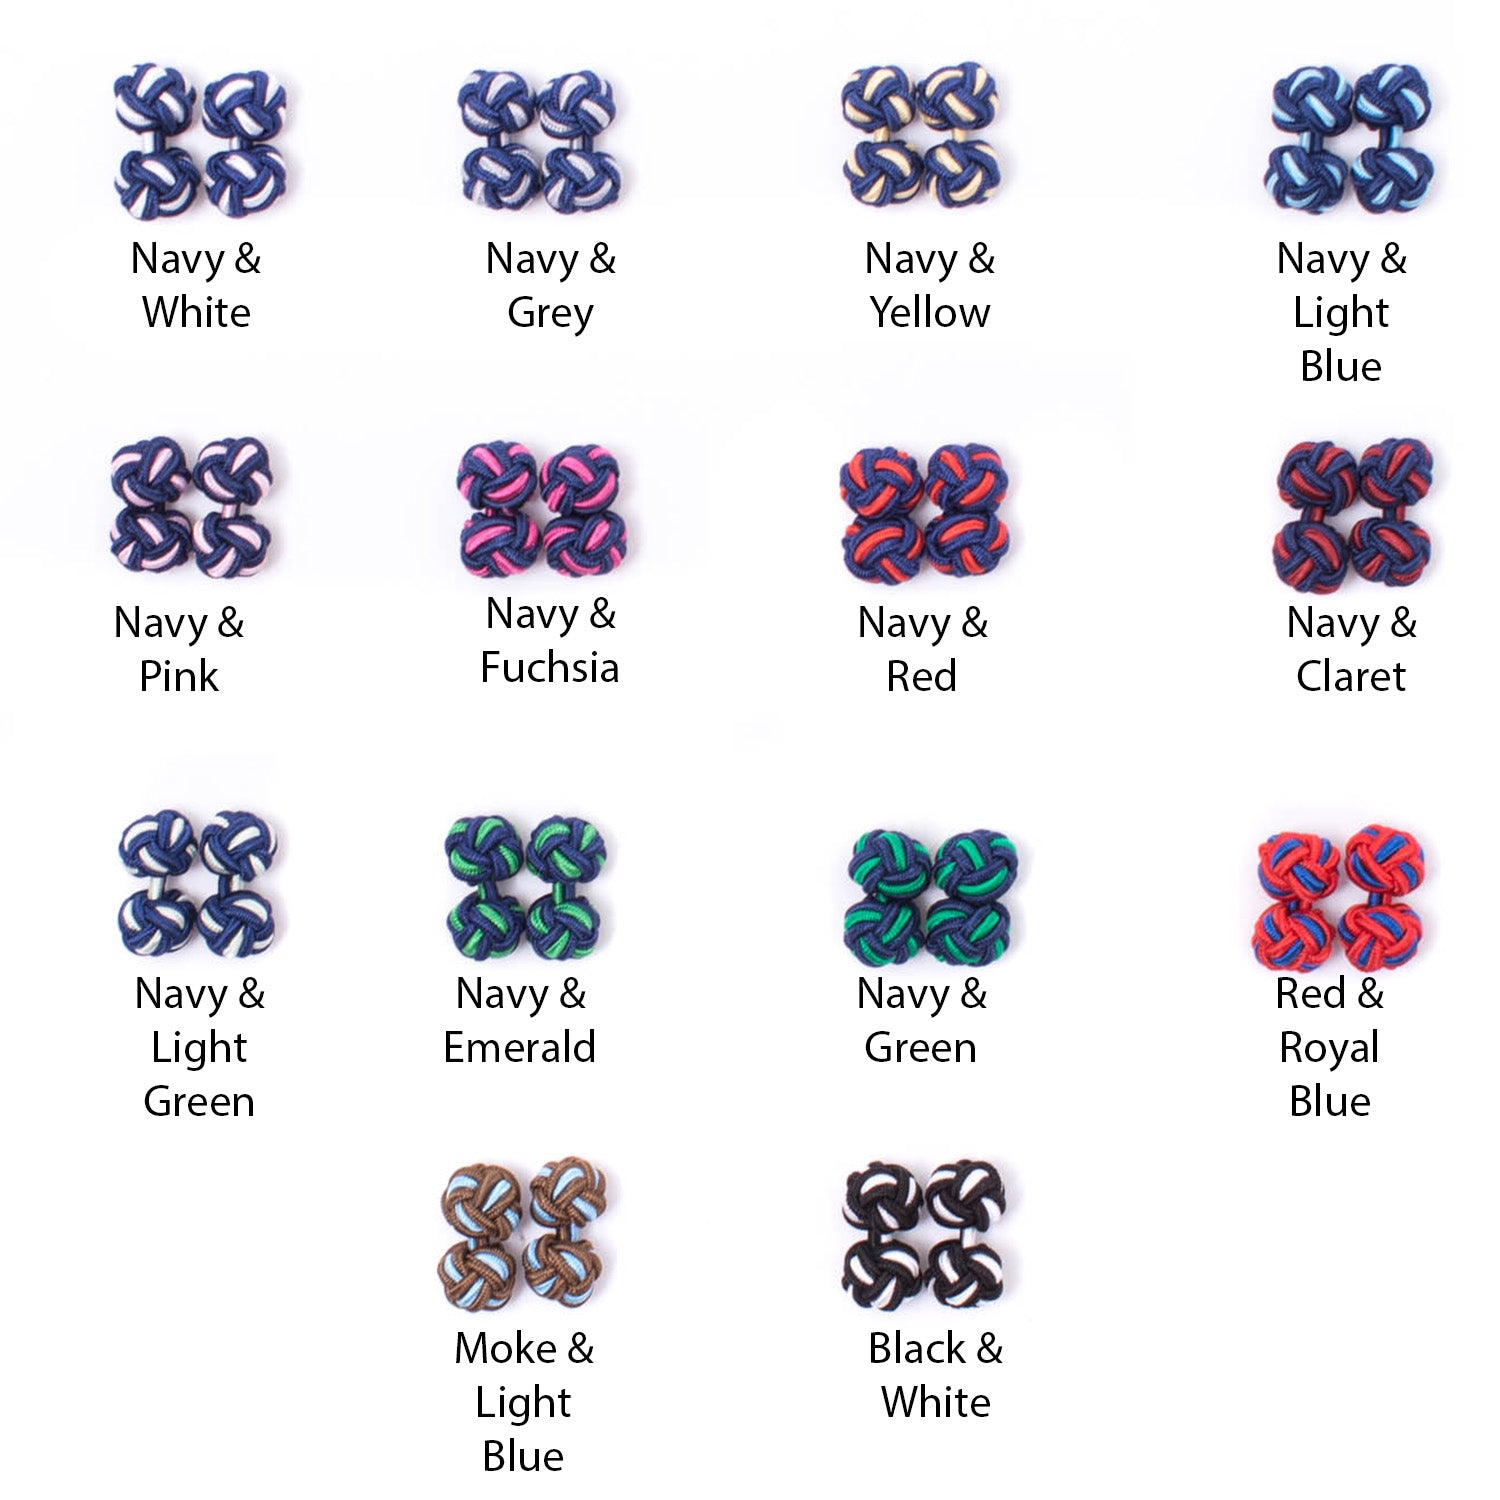 A chart displaying various colors and patterns of Dual Colored Knot Cufflinks by KirbyAllison.com.